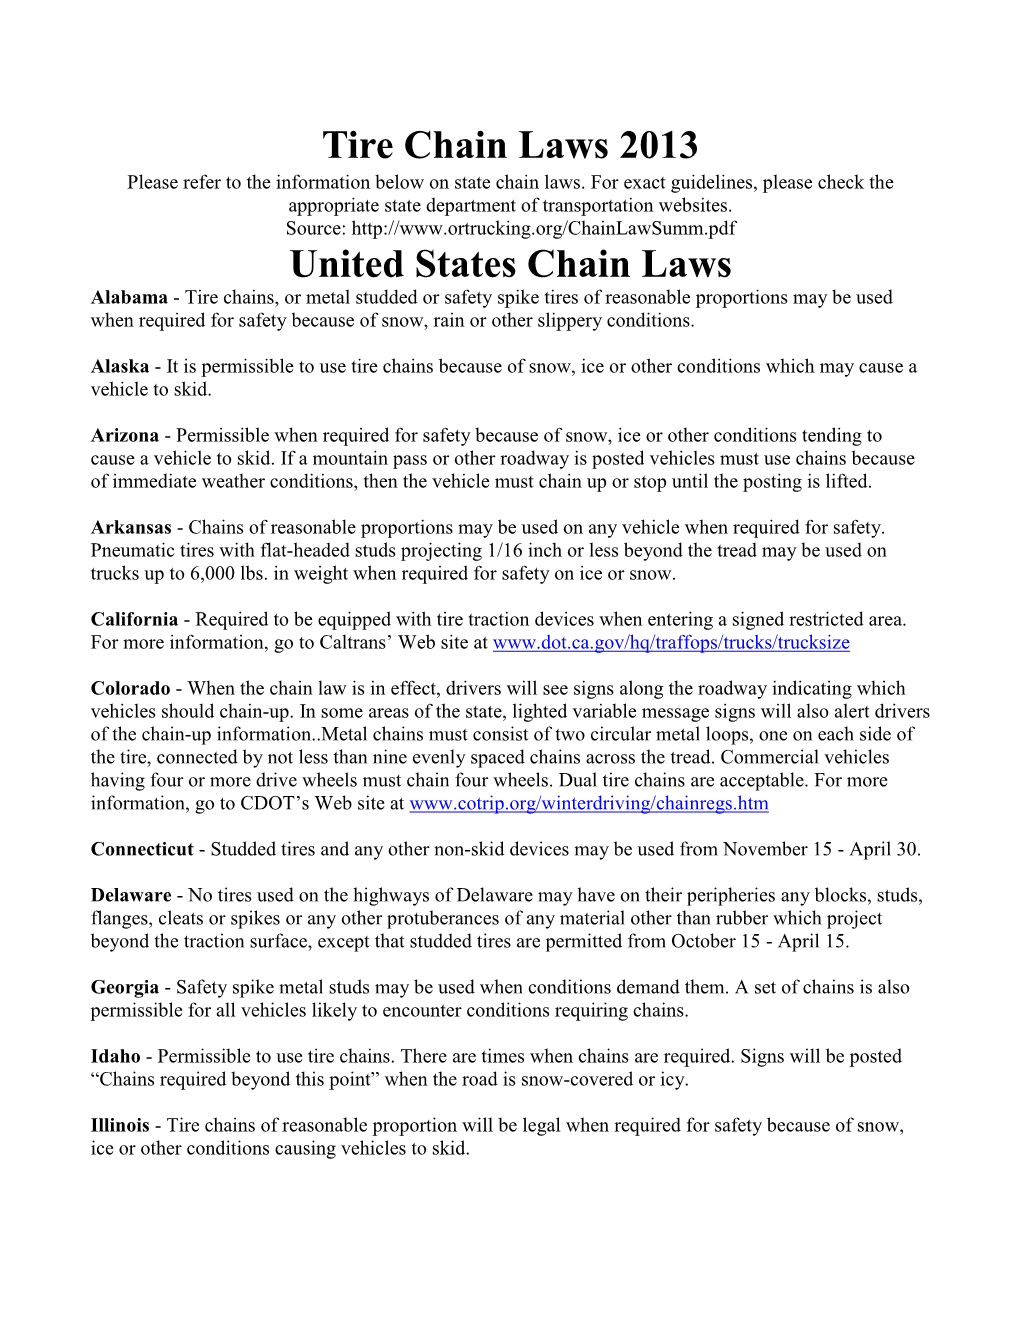 Tire Chain Laws 2013 Please Refer to the Information Below on State Chain Laws